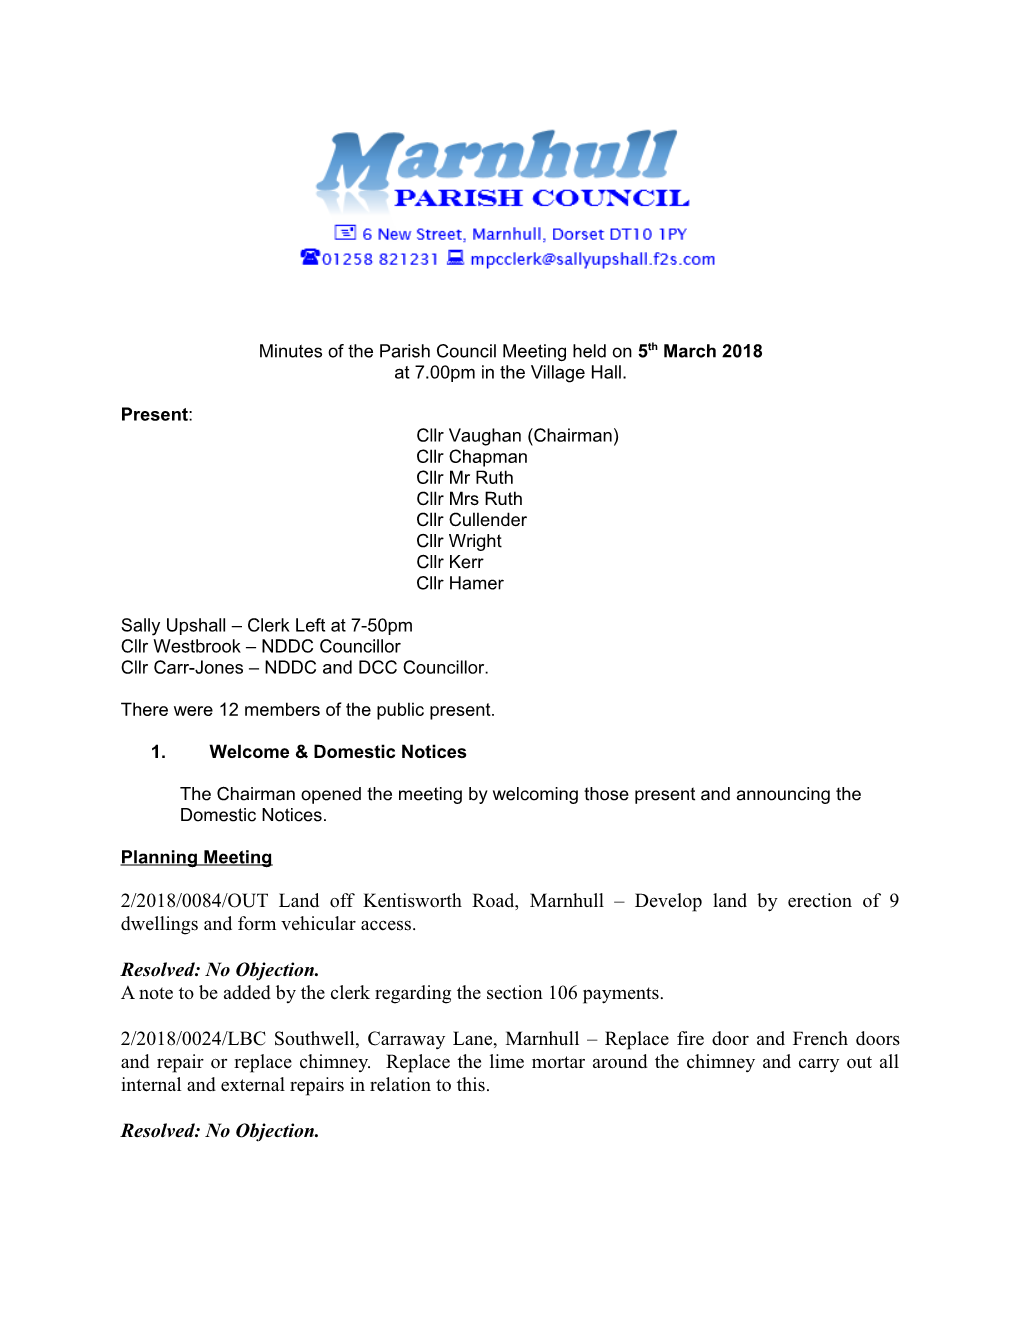 Minutes of the Parish Council Meeting Held on 5Th March 2018